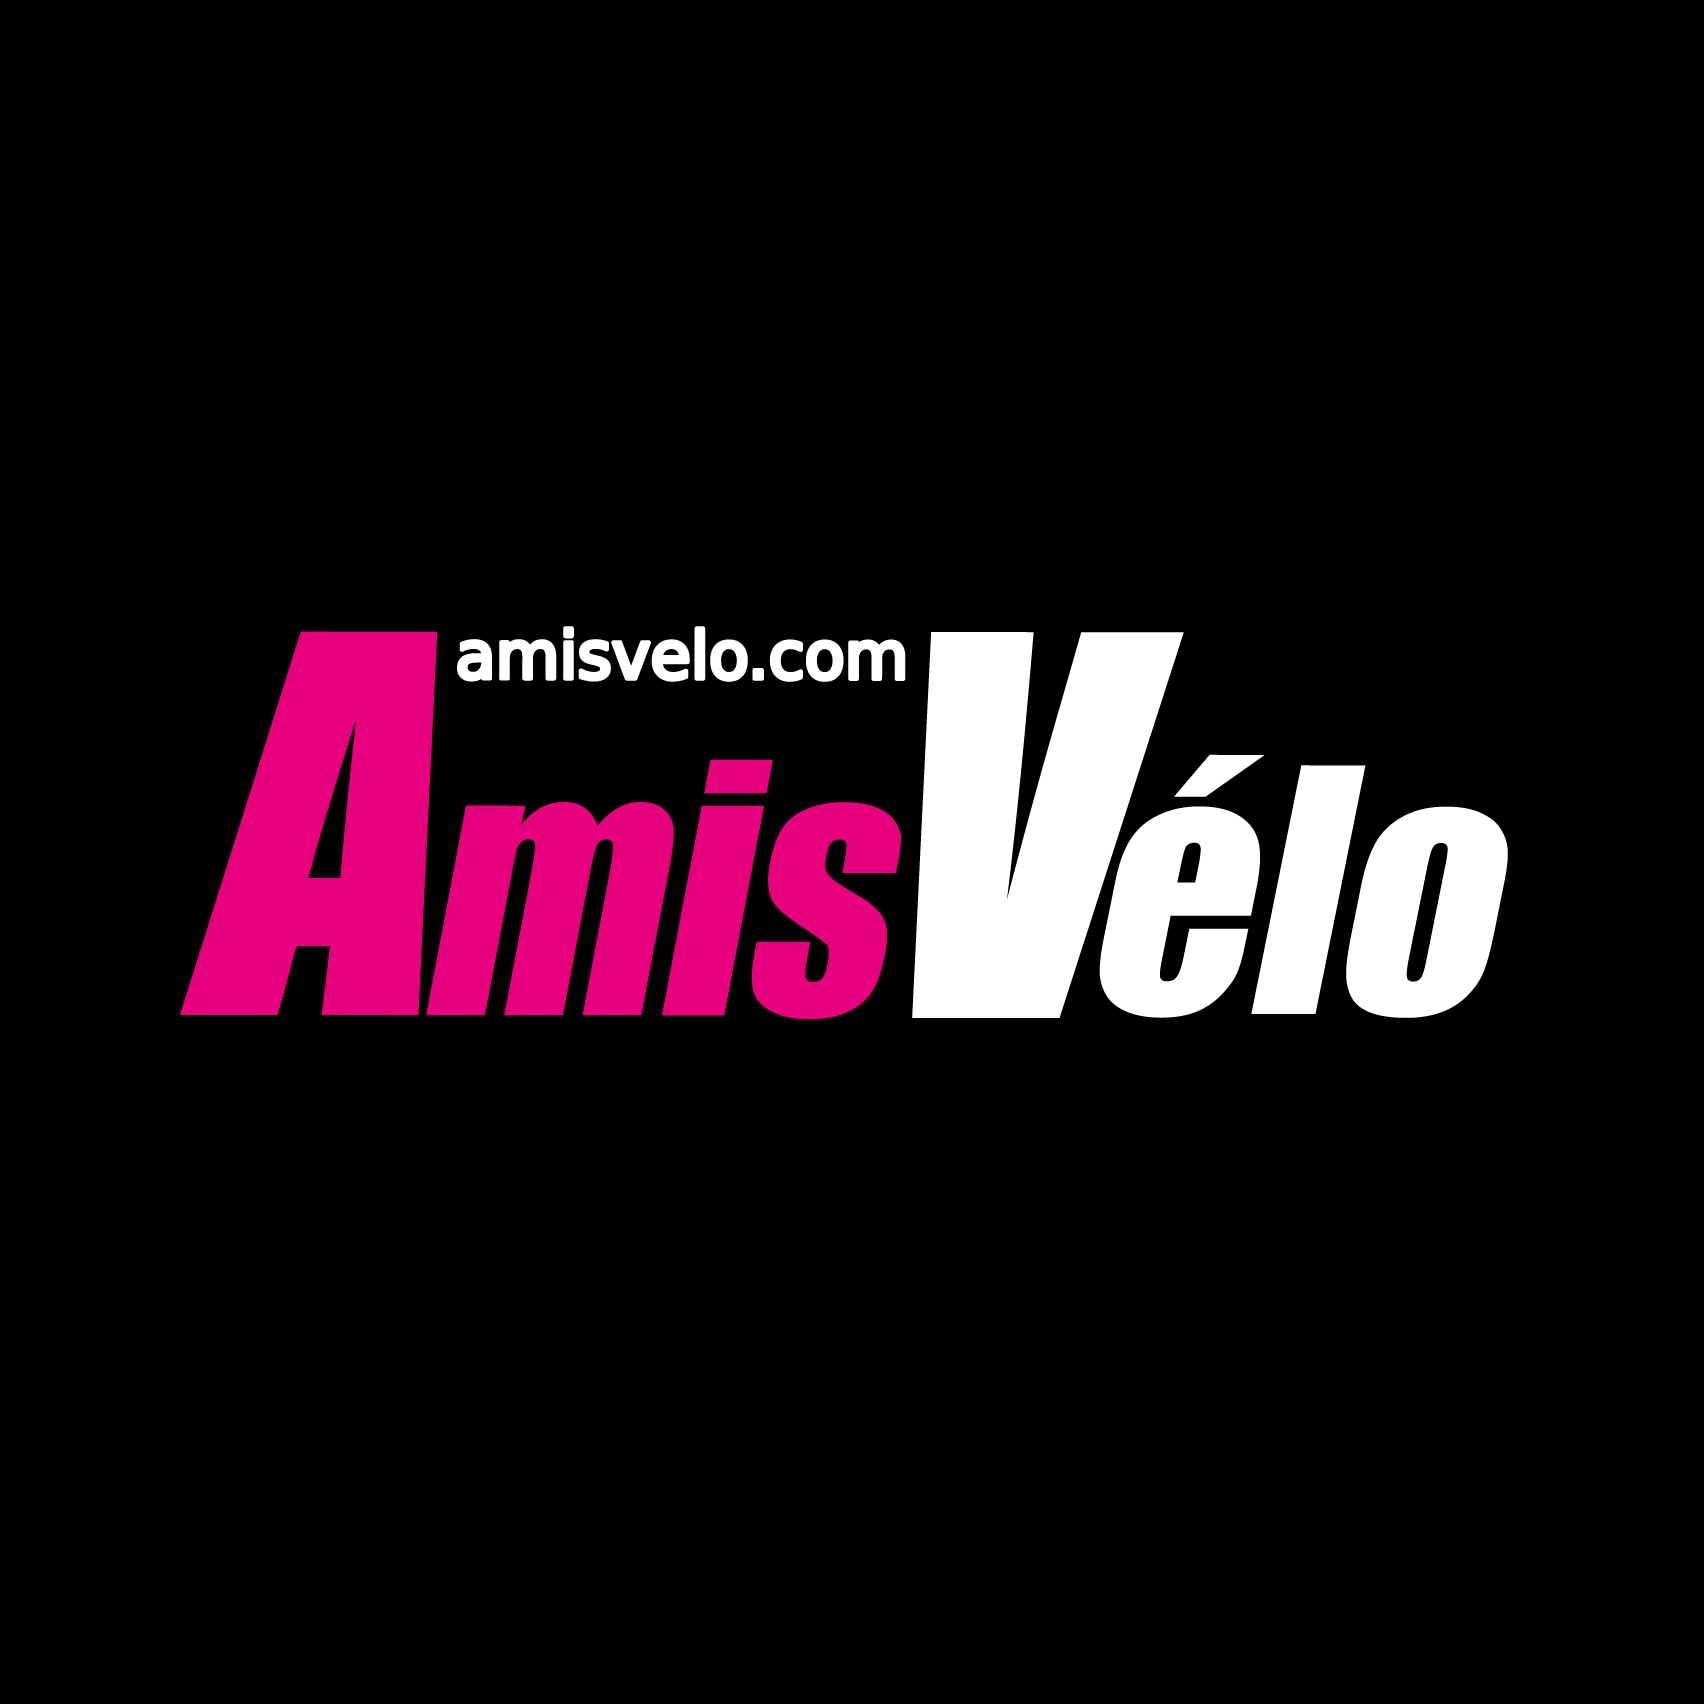 Club Image for AMIS VELO